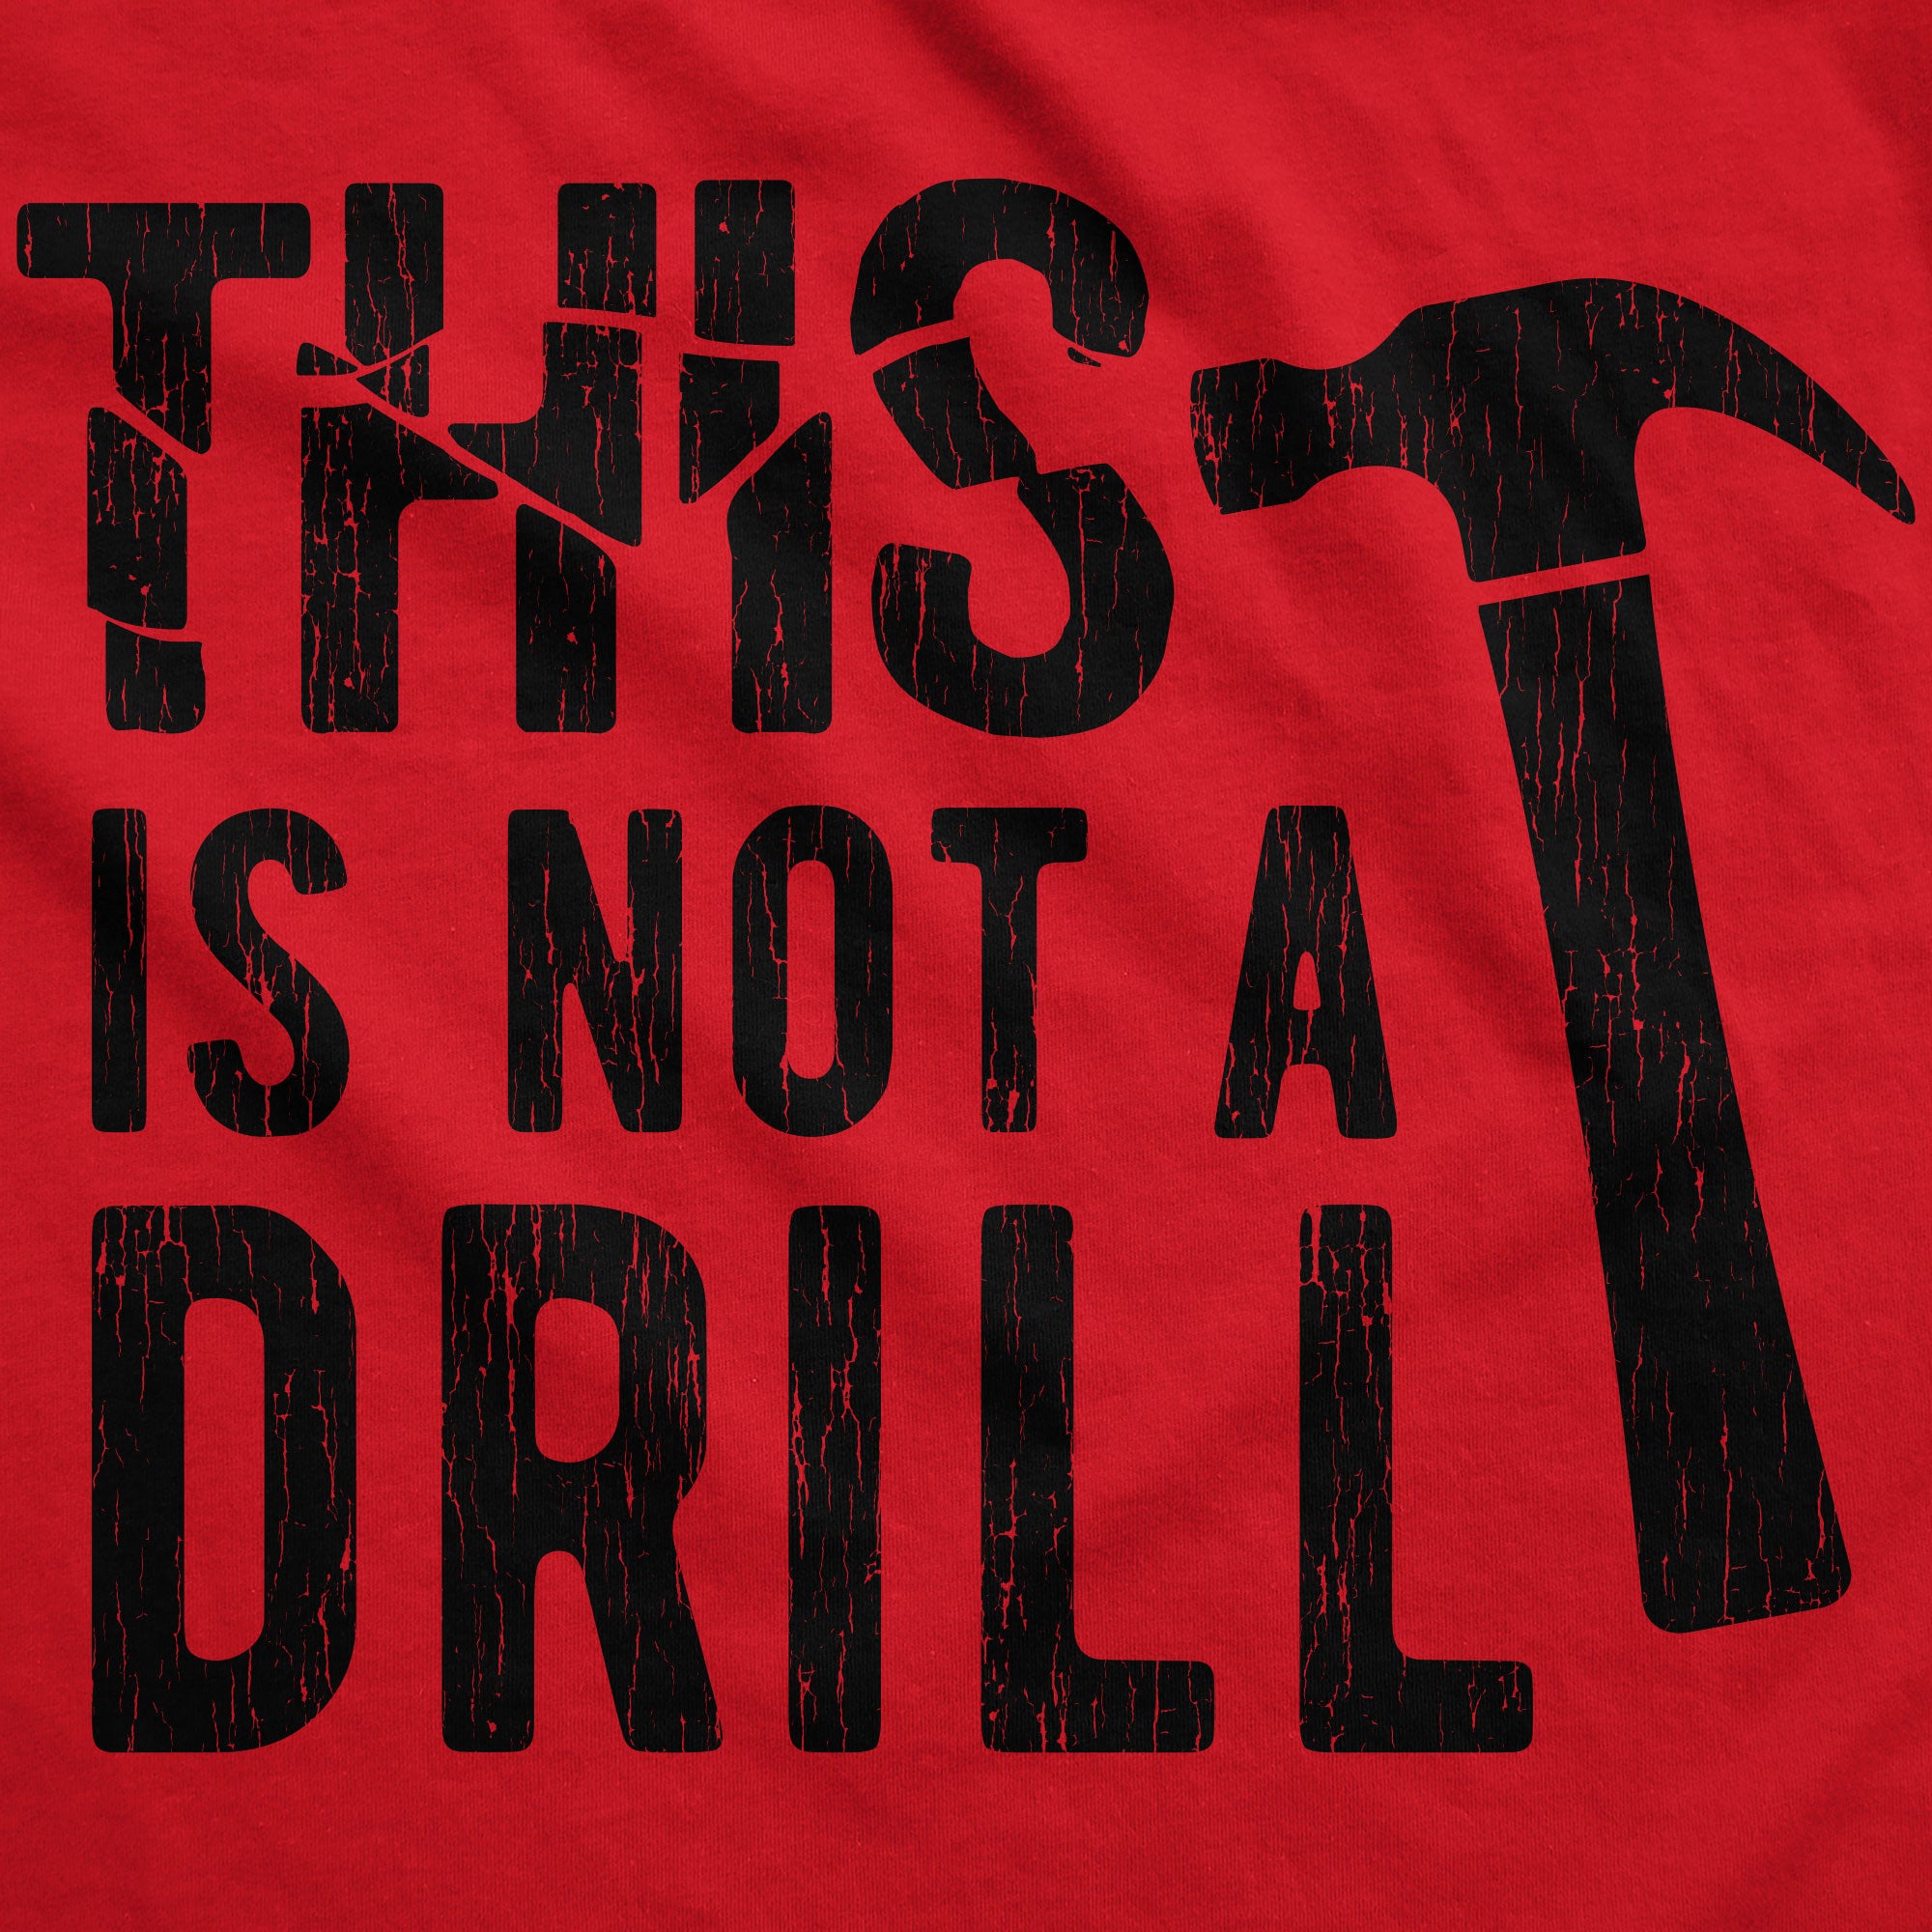 Funny Red - Not A Drill This Is Not A Drill Hoodie Nerdy Father's Day Tee